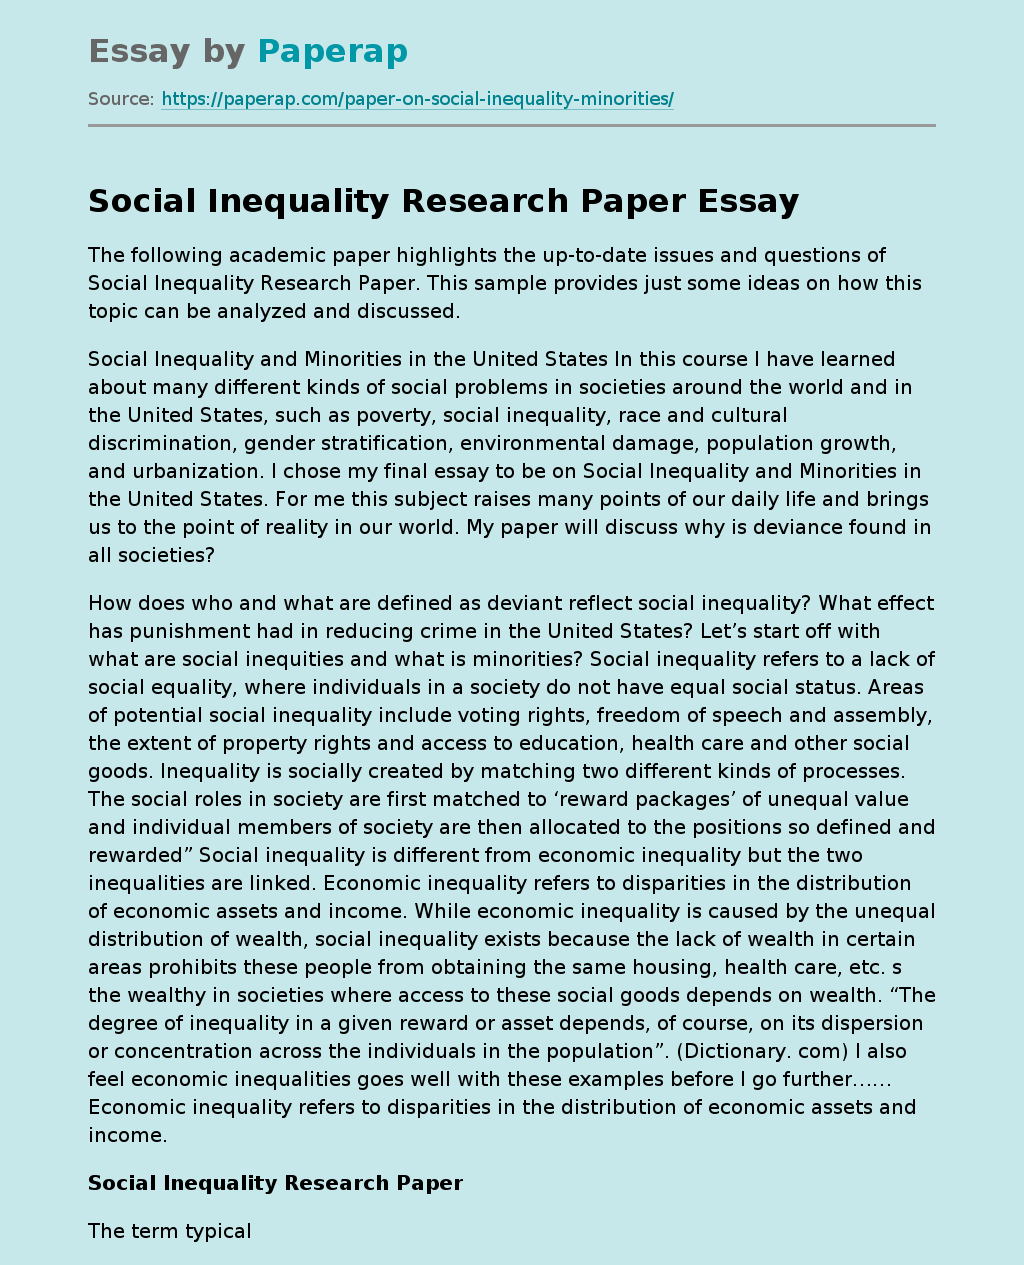 Social Inequality Research Paper